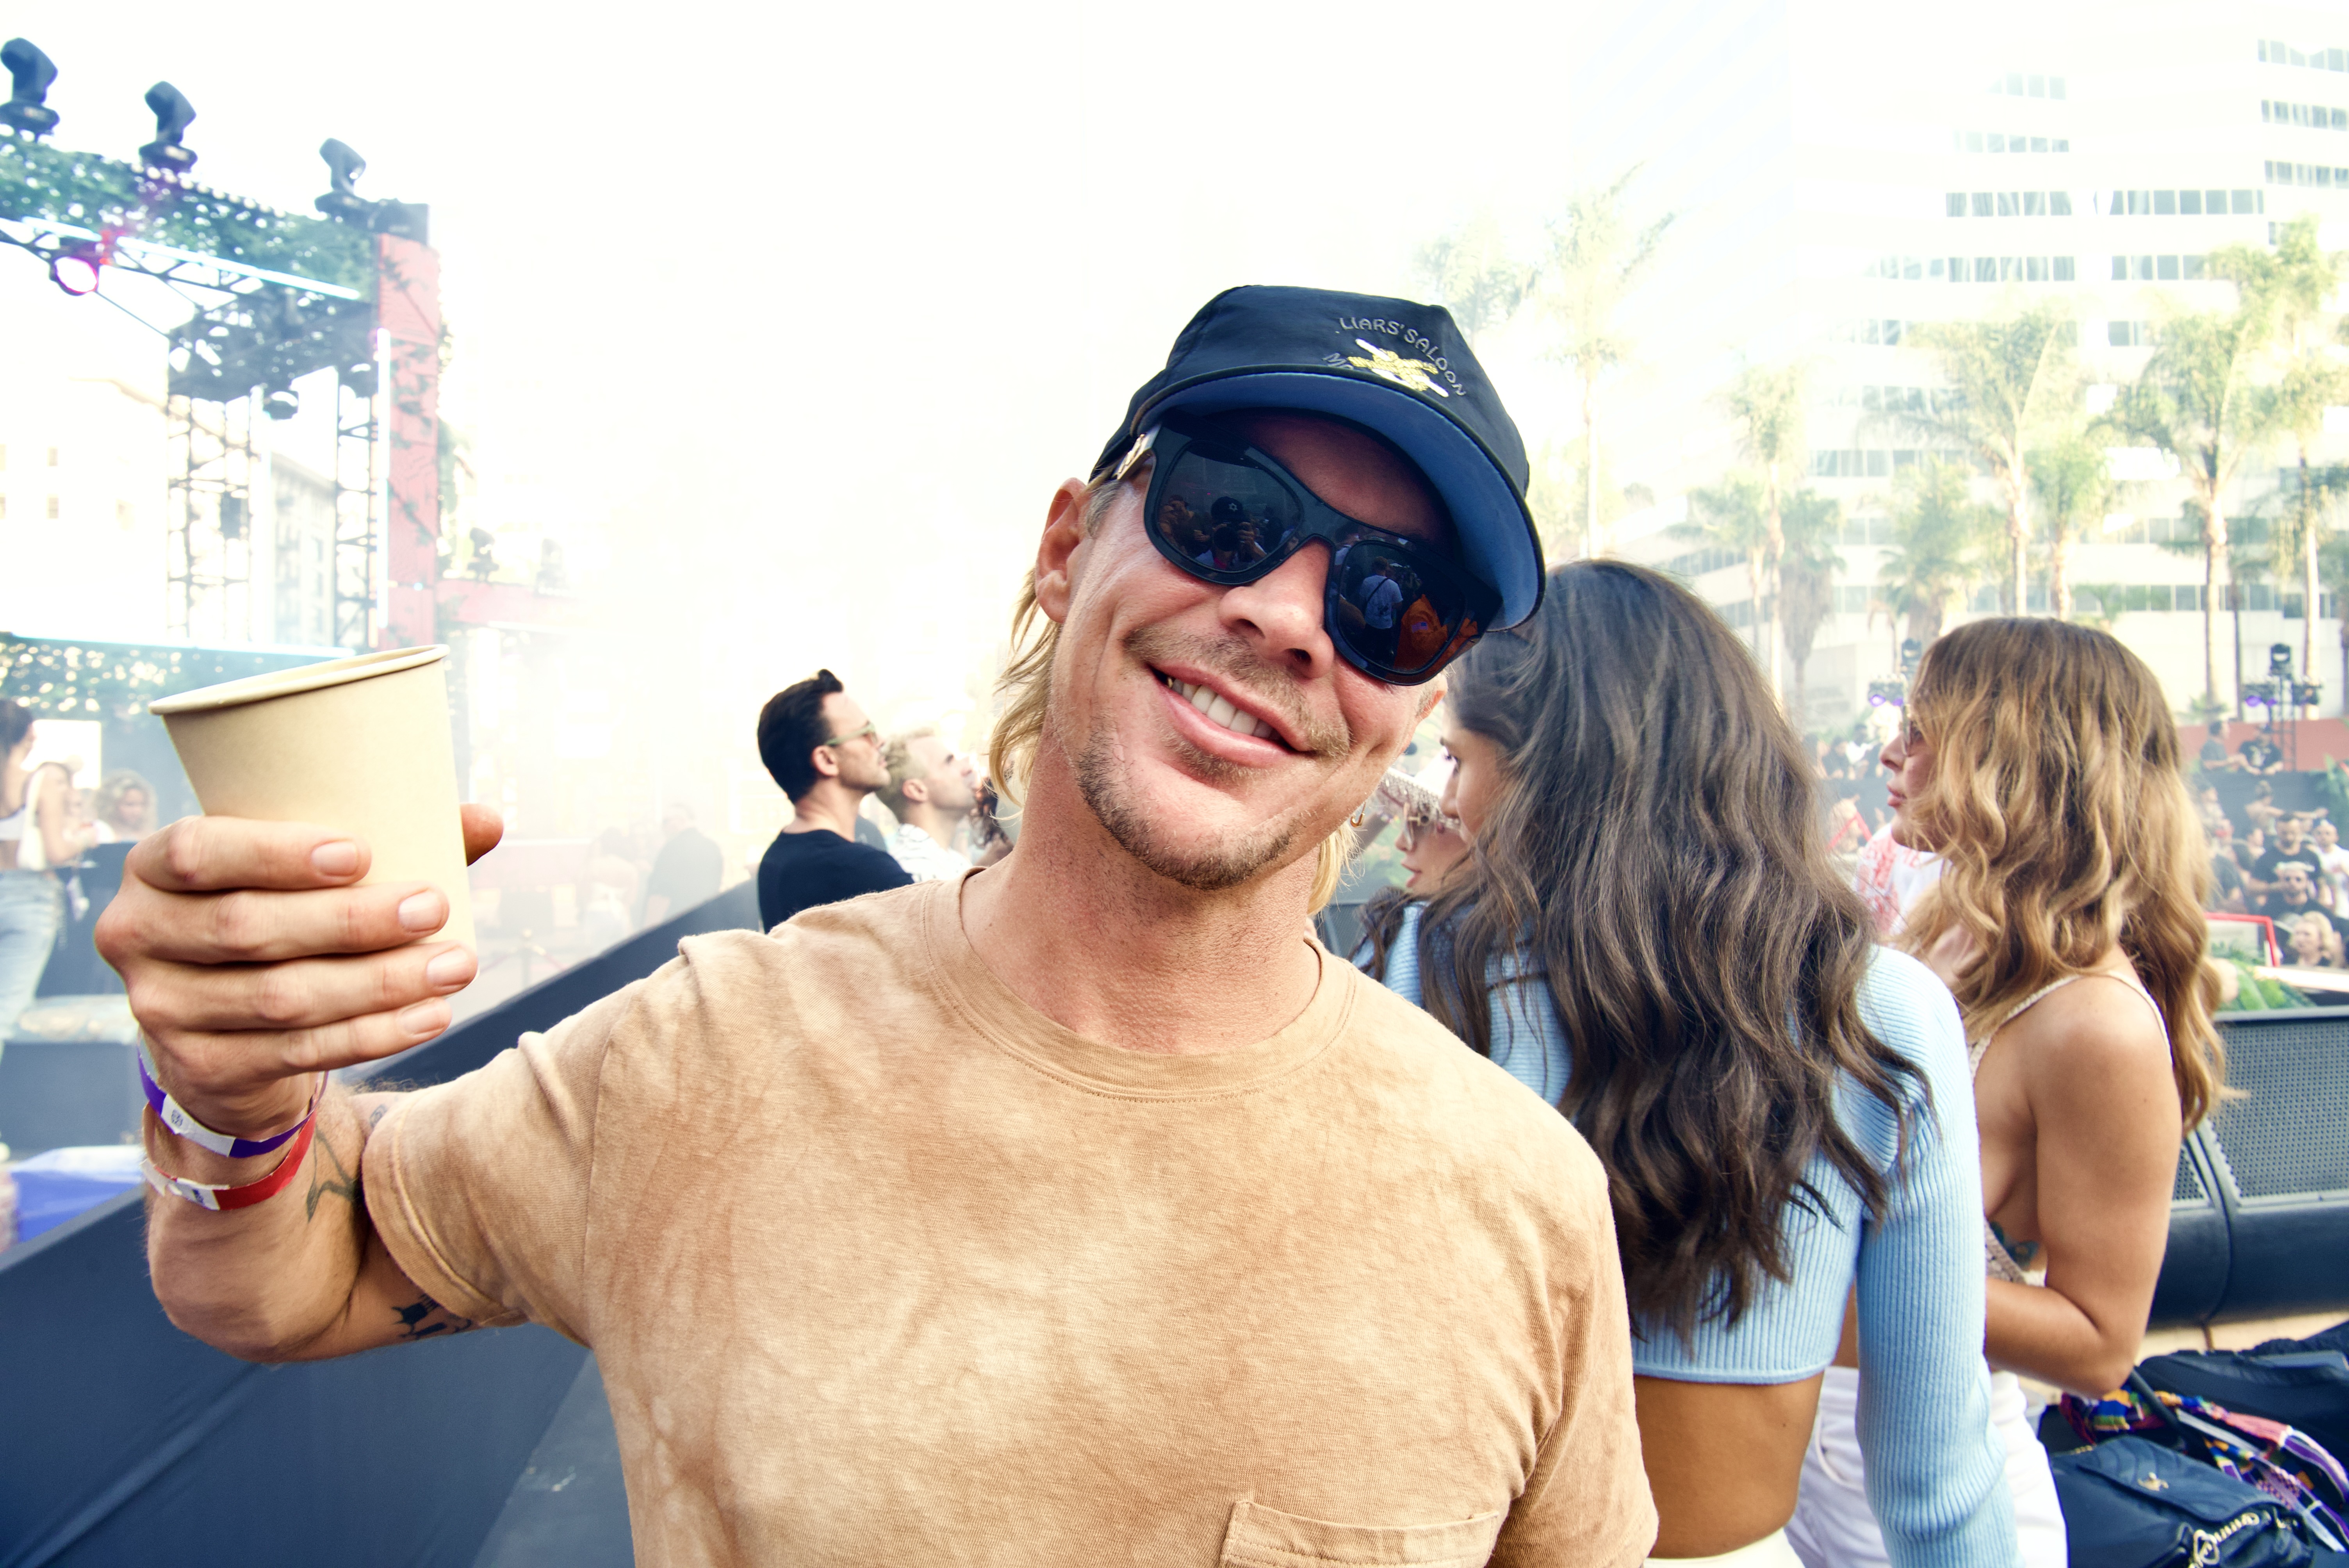 Diplo attends the event, standing with a beverage.